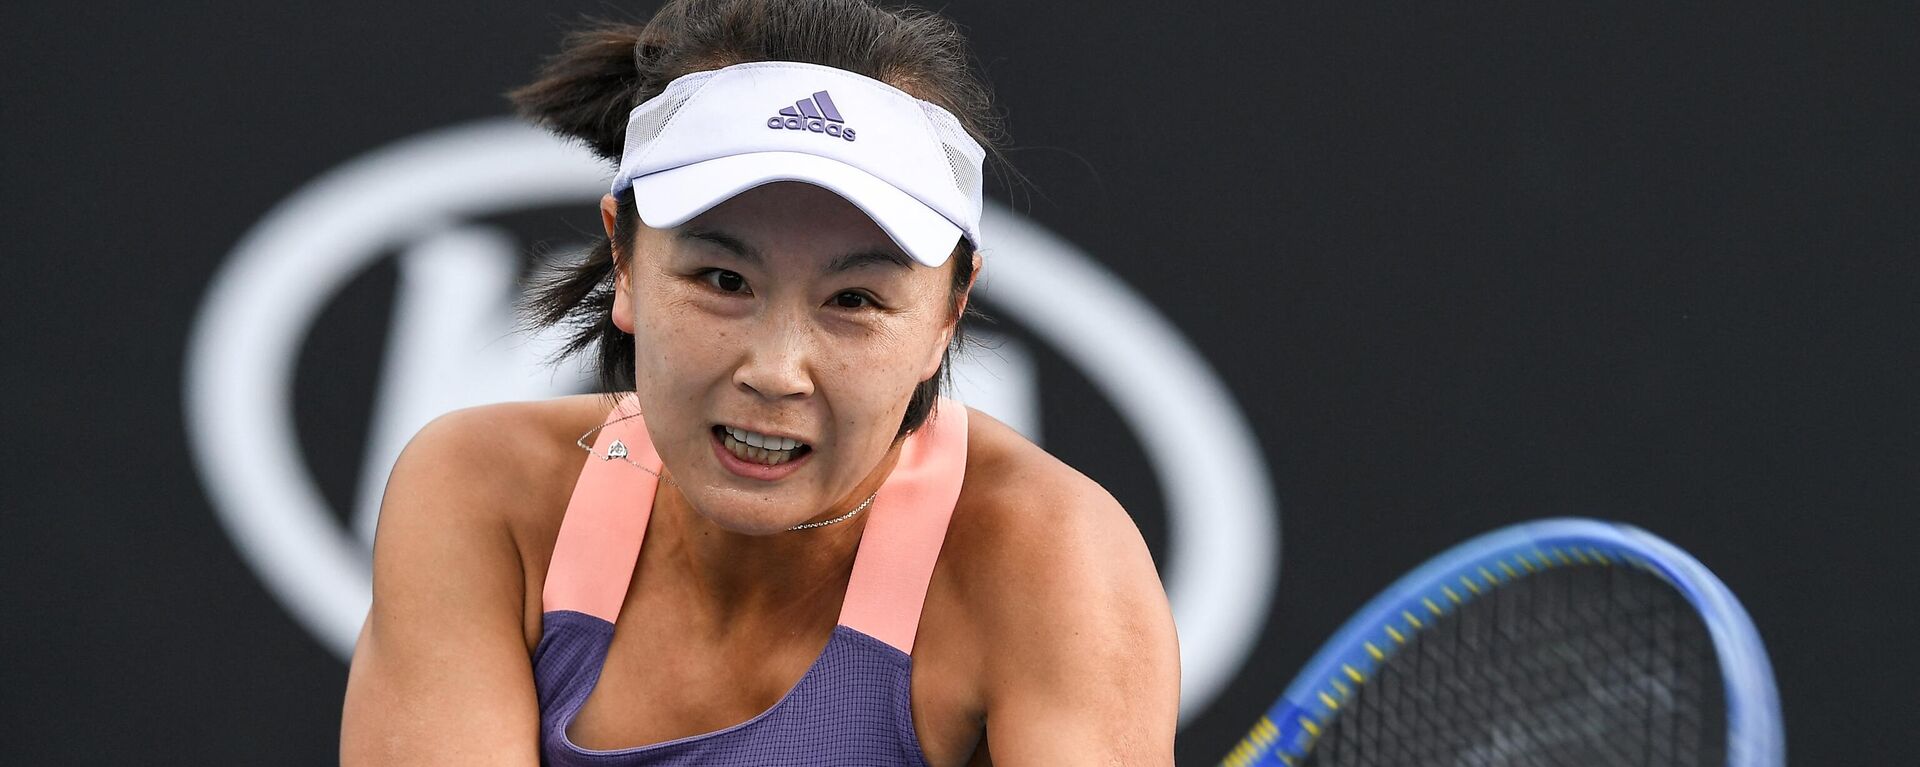 China's Shuai Peng hits a return against Japan's Nao Hibino during their women's singles match on day two of the Australian Open tennis tournament in Melbourne on January 21, 2020.  - Sputnik International, 1920, 23.11.2021